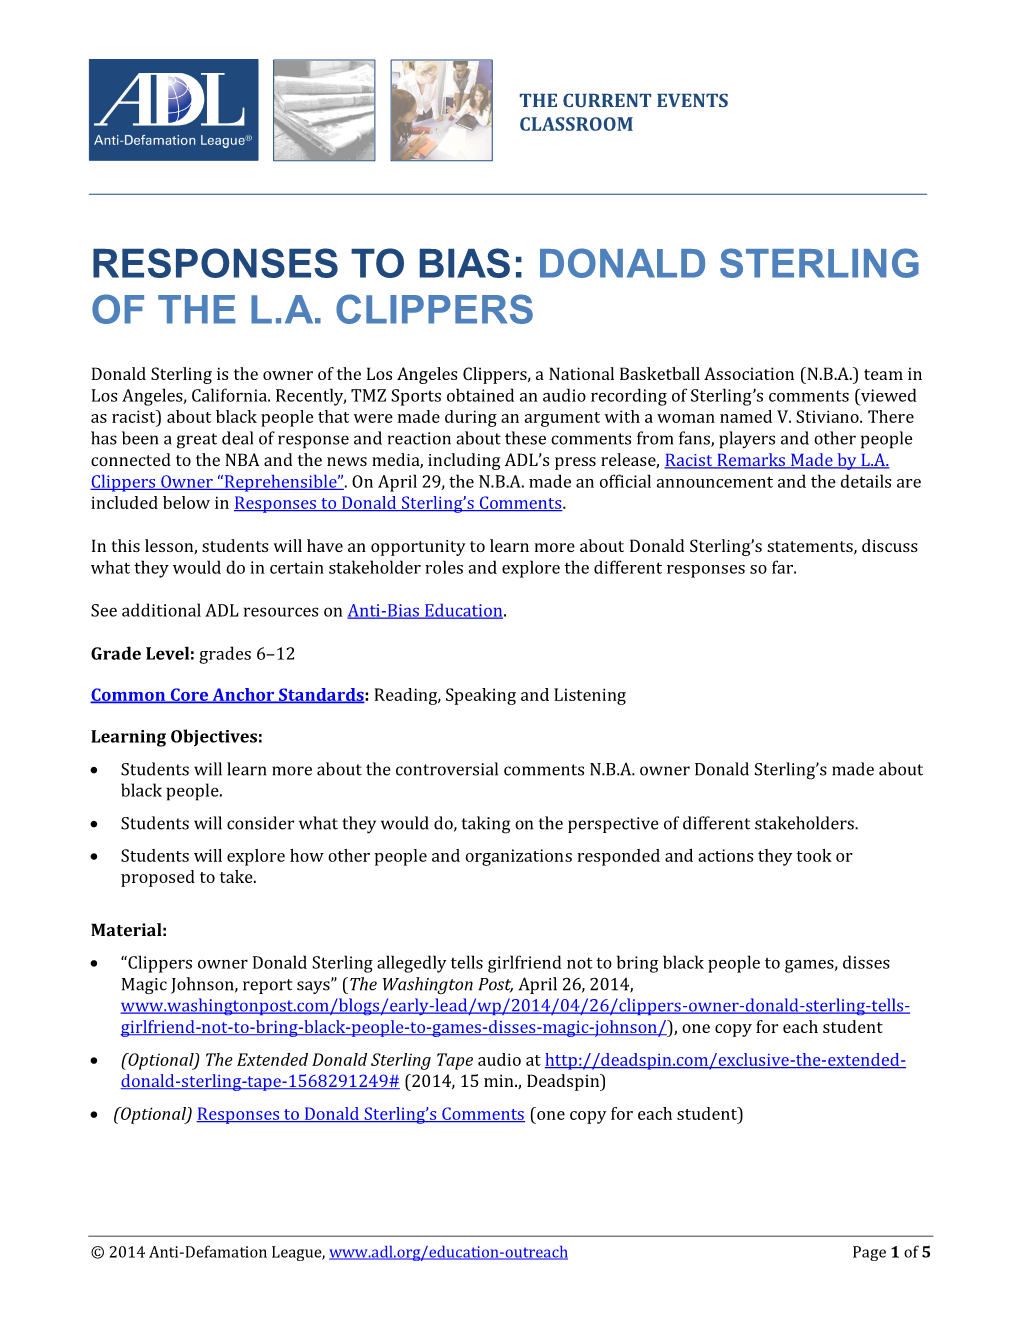 Donald Sterling of the La Clippers